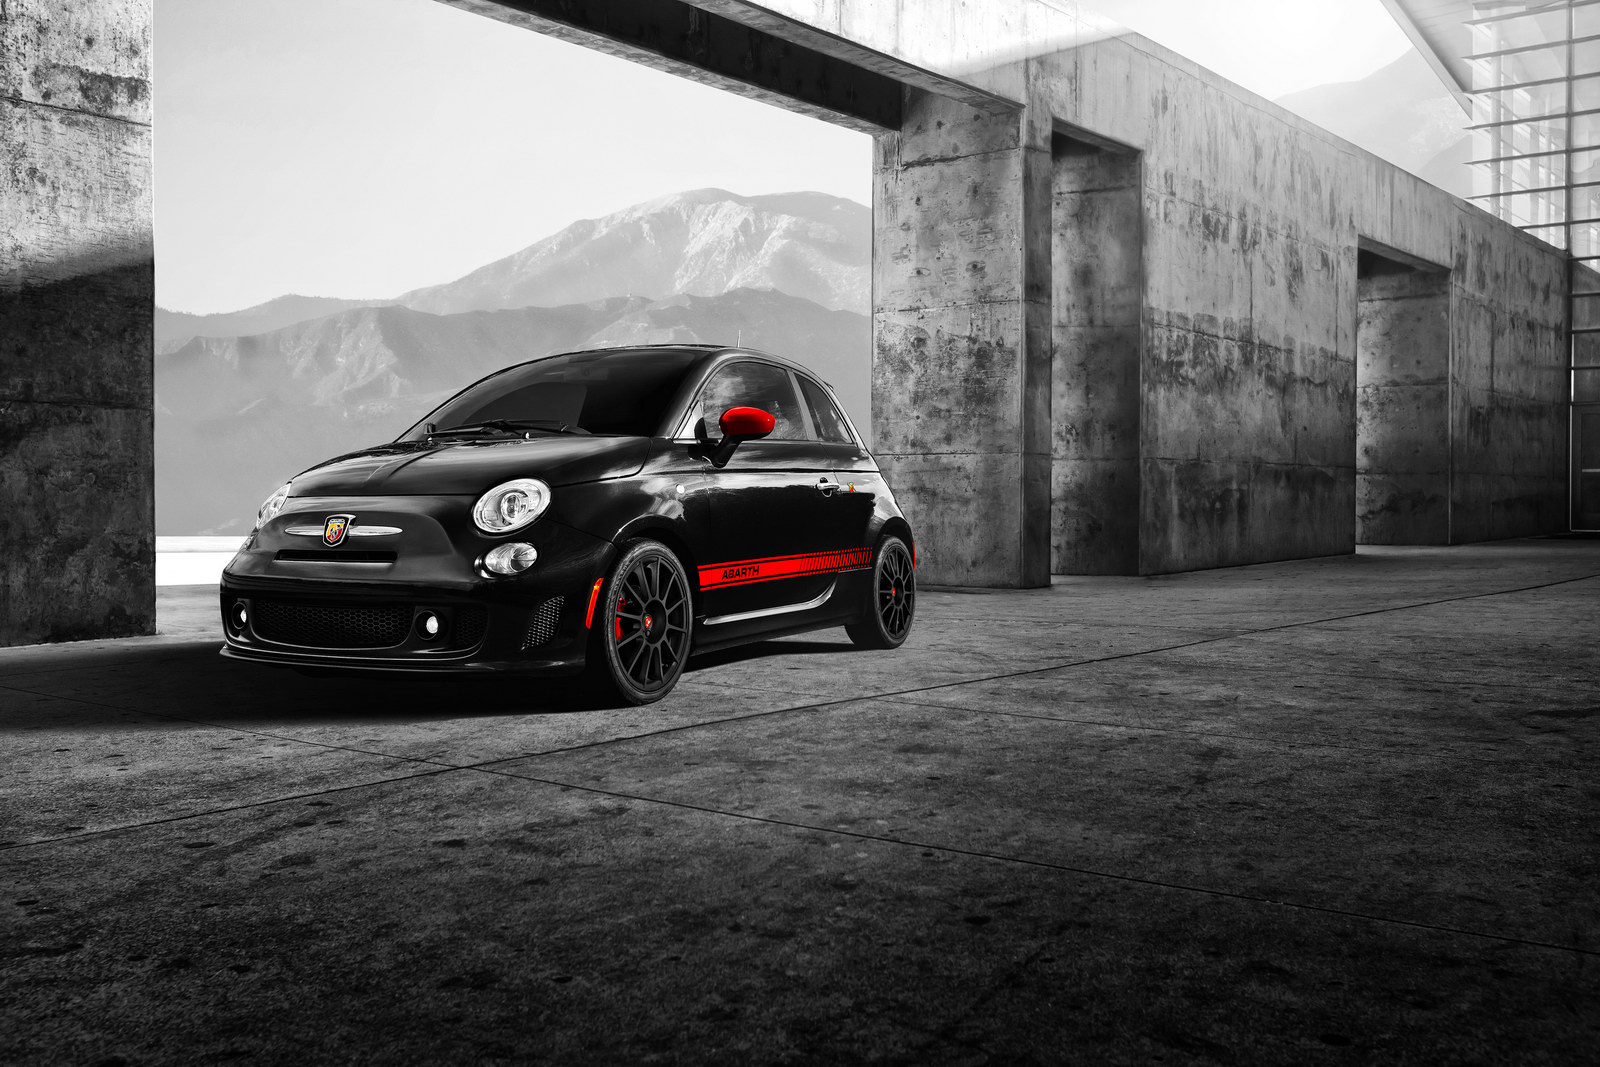 New 2012 Fiat 500 Abarth Hits U.S. Shores with 160HP 1.4L Turbo Engine [36  Photos]